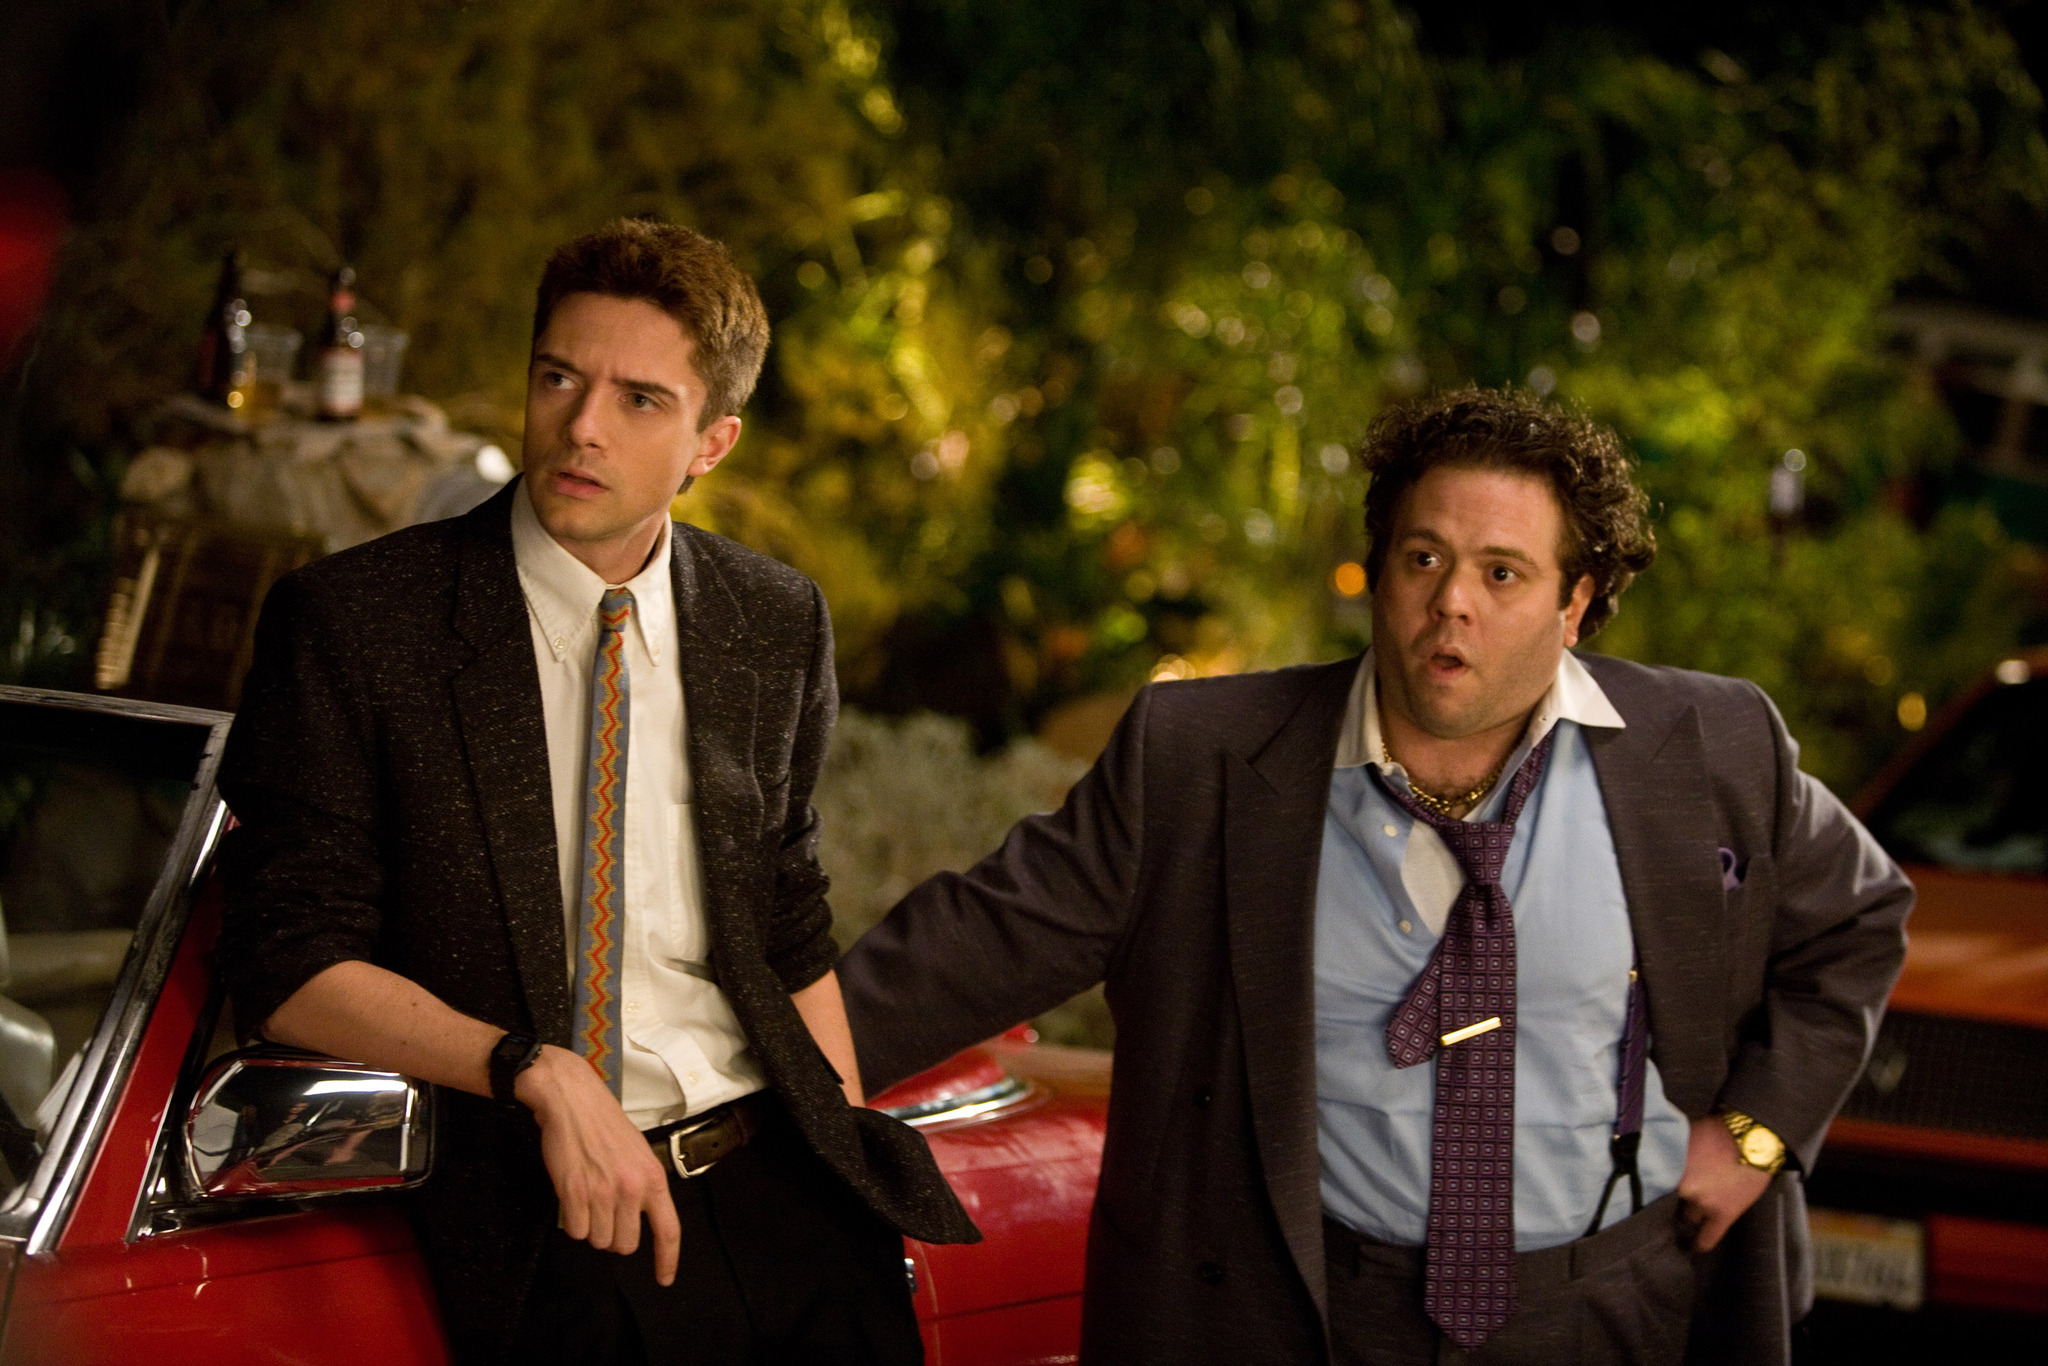 Still of Dan Fogler and Topher Grace in Take Me Home Tonight (2011)